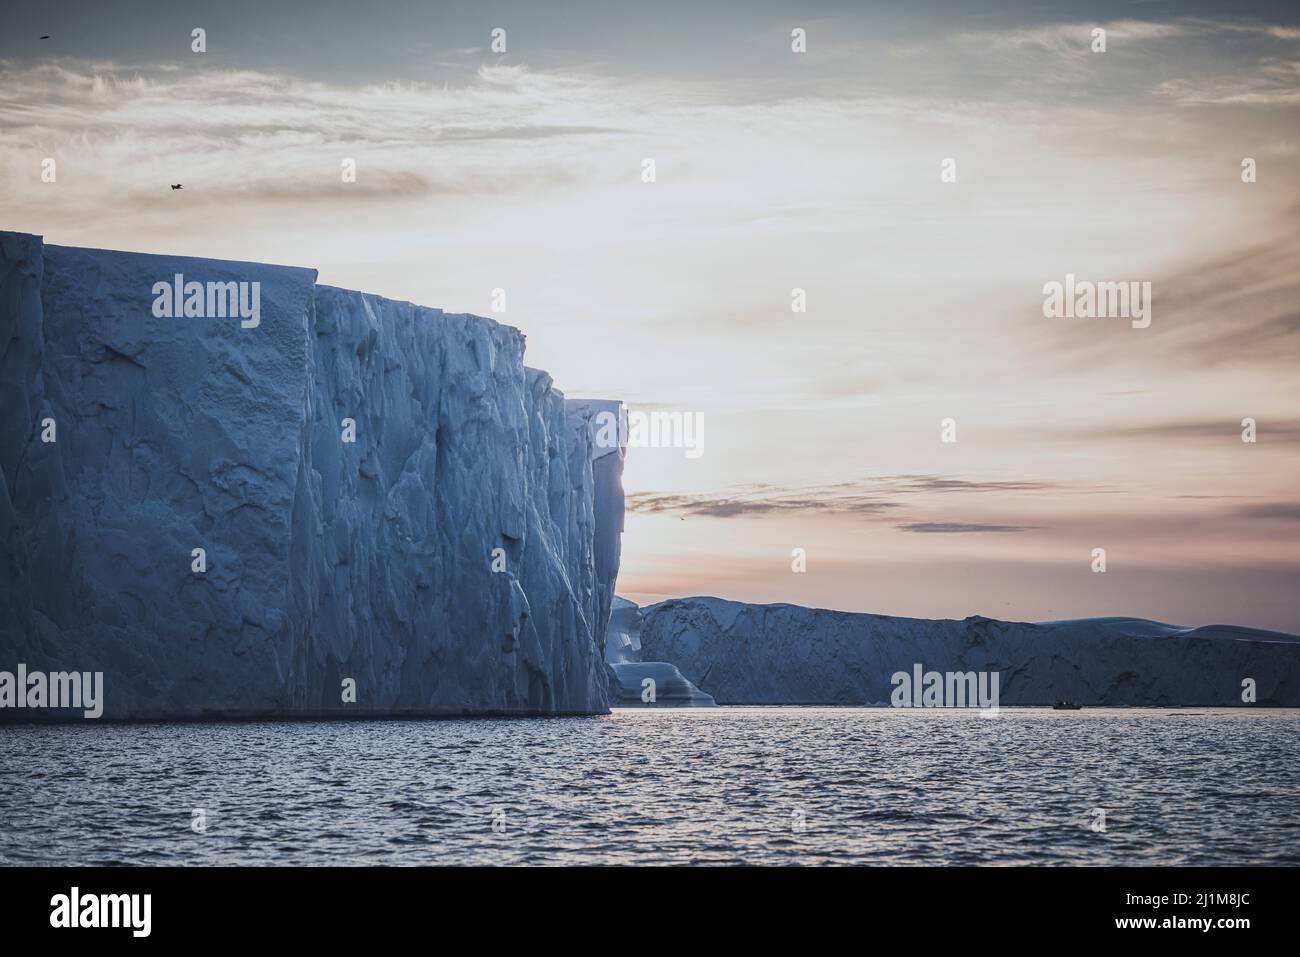 Big icebergs floating over sea at sunset Stock Photo